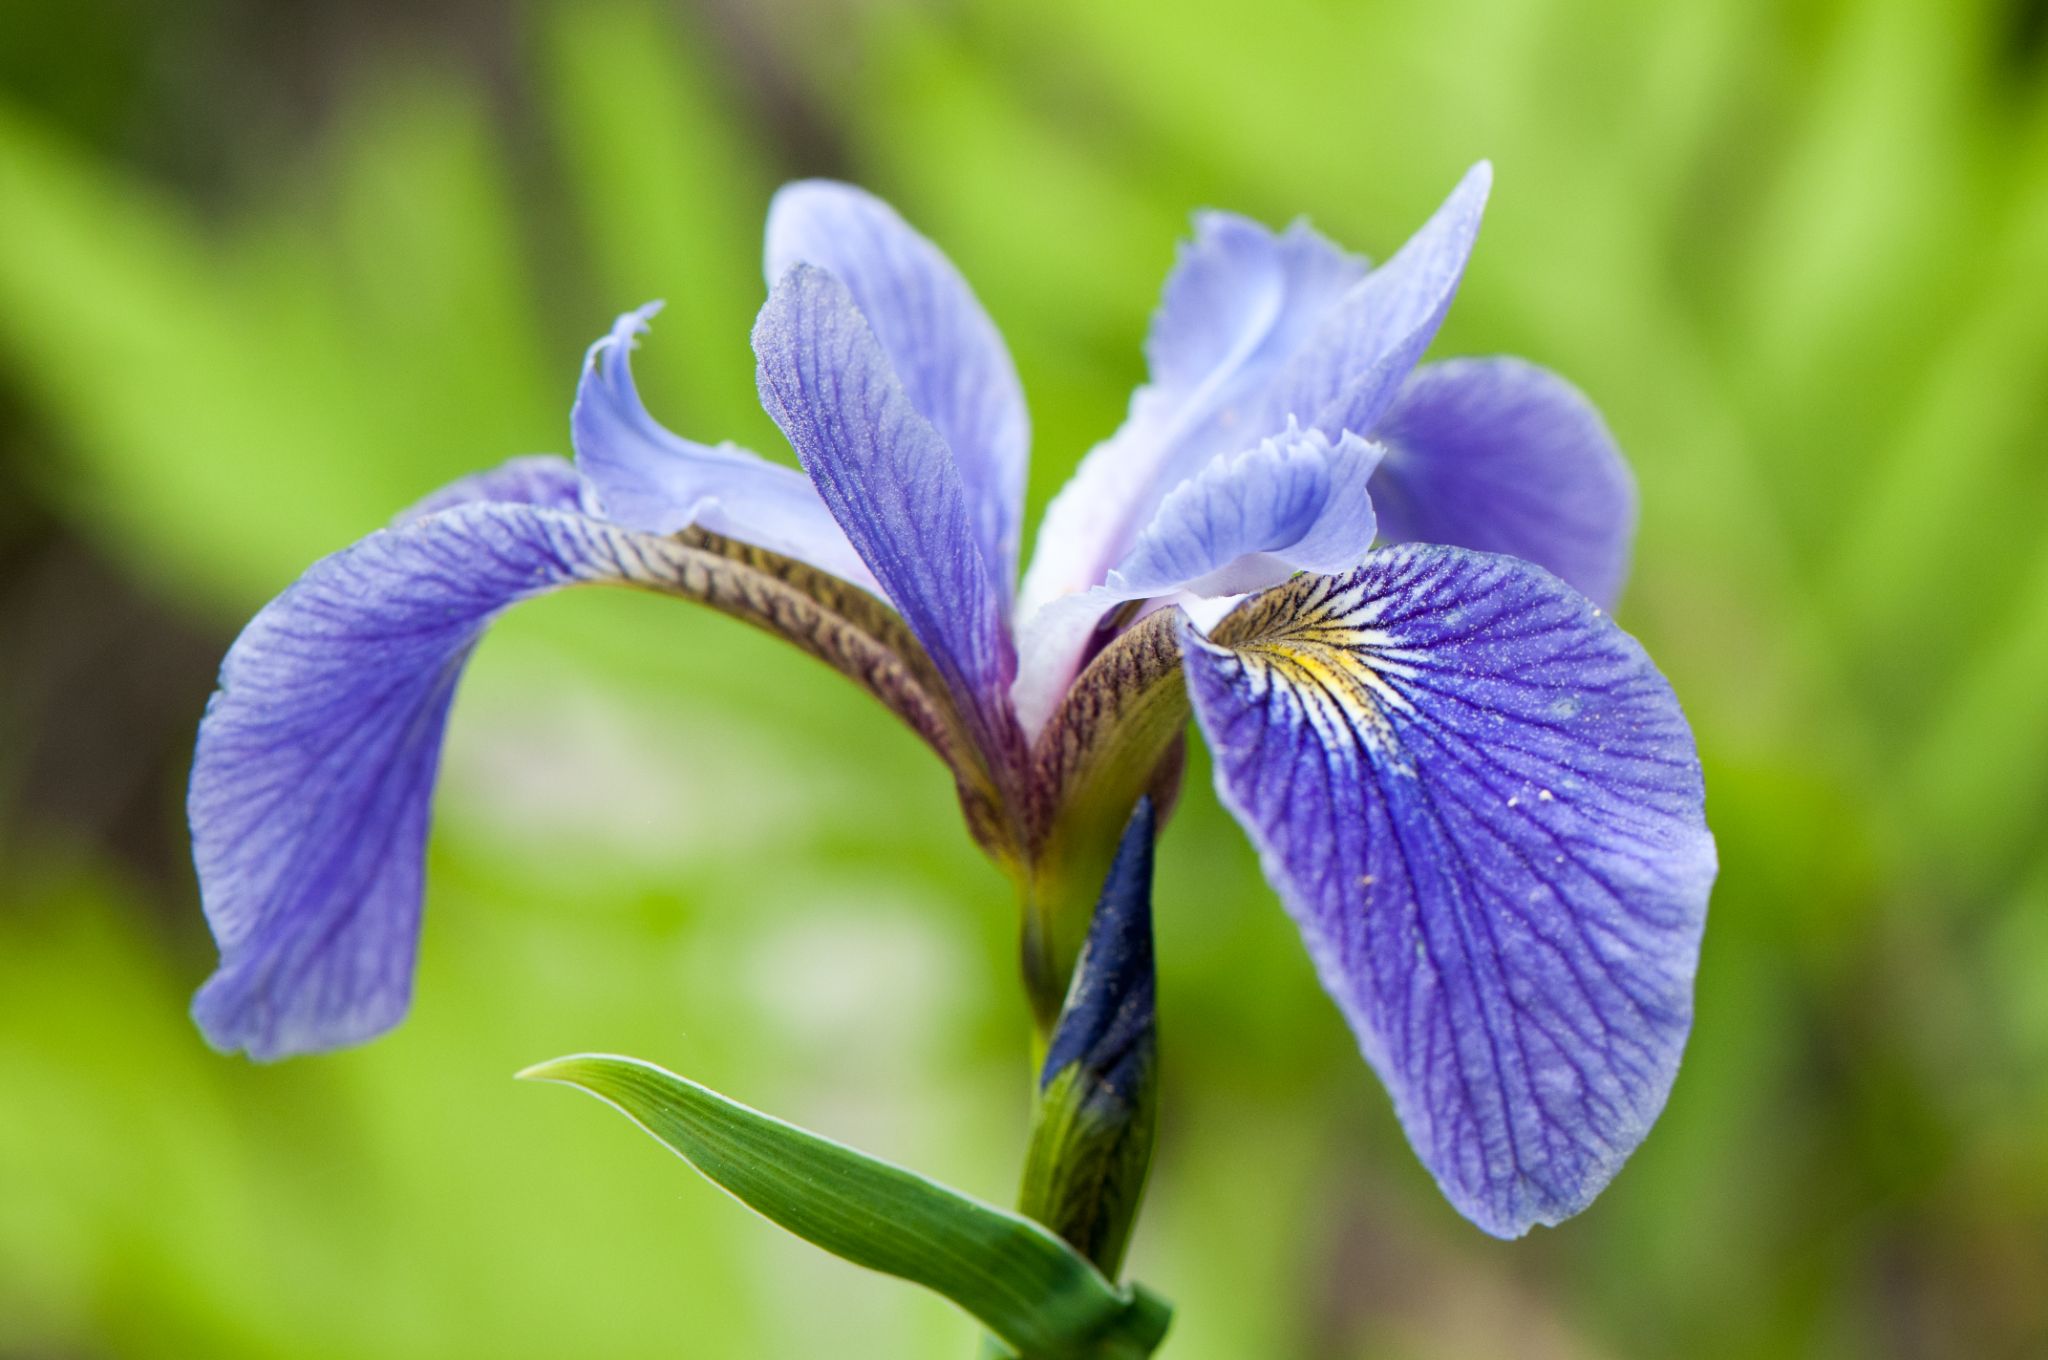 Top 9 Plants for Wet Areas Recommended by Garden Experts